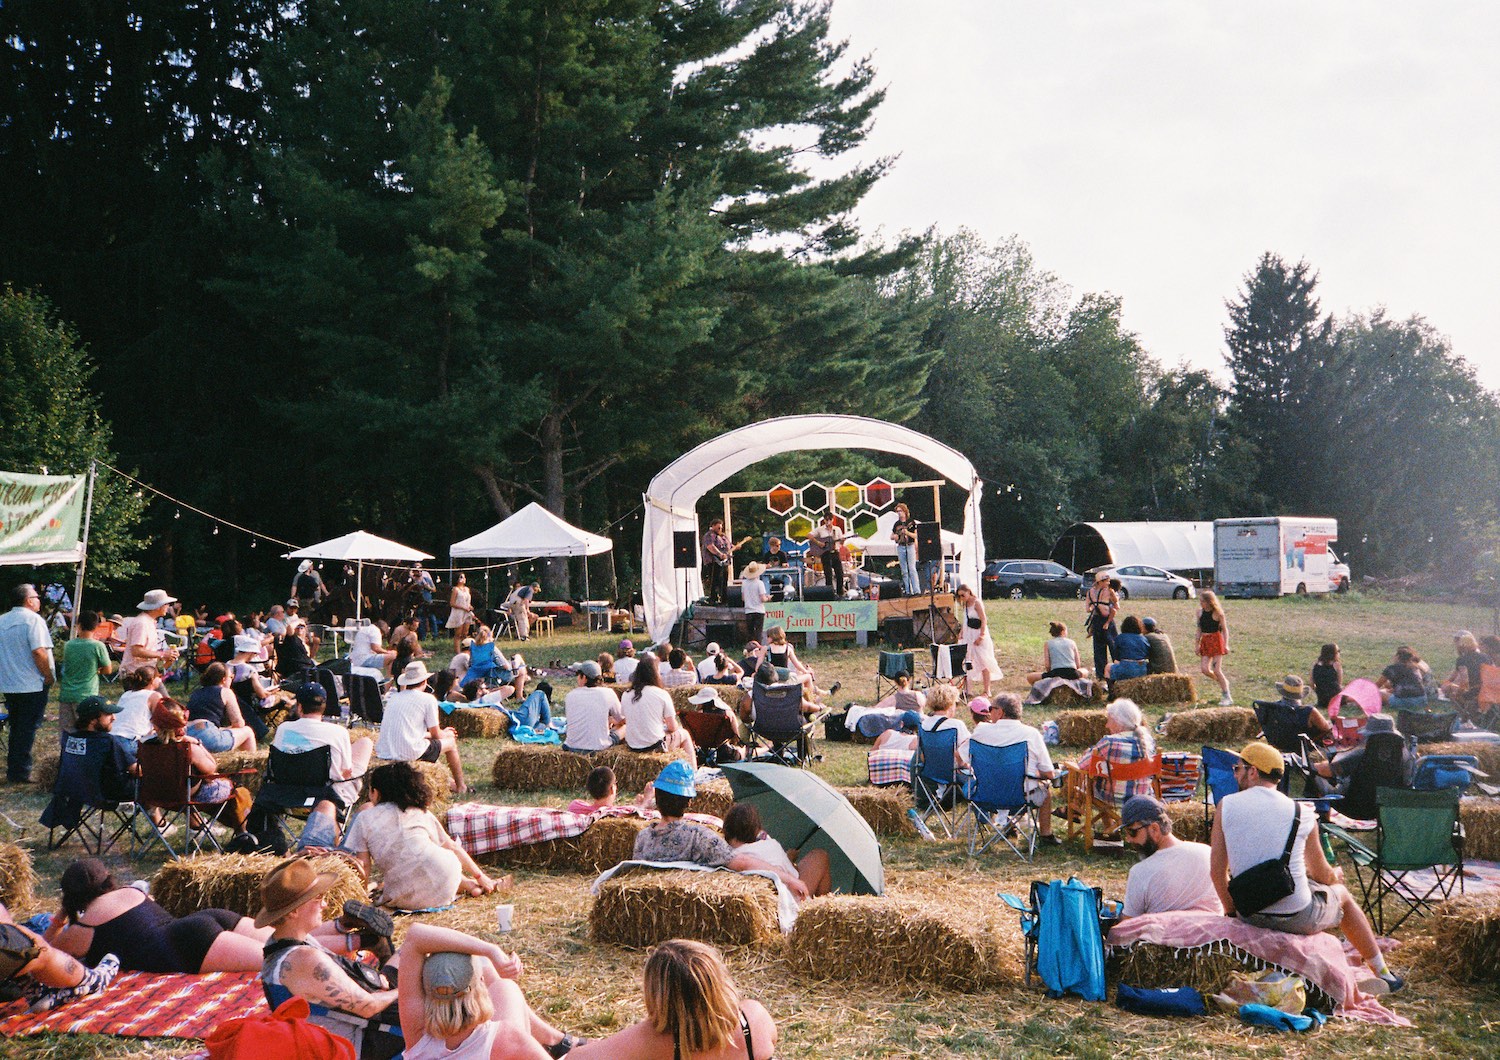 Attendees sitting on haybales in a grassy field watch an artist perform at Avrom Farm Party.